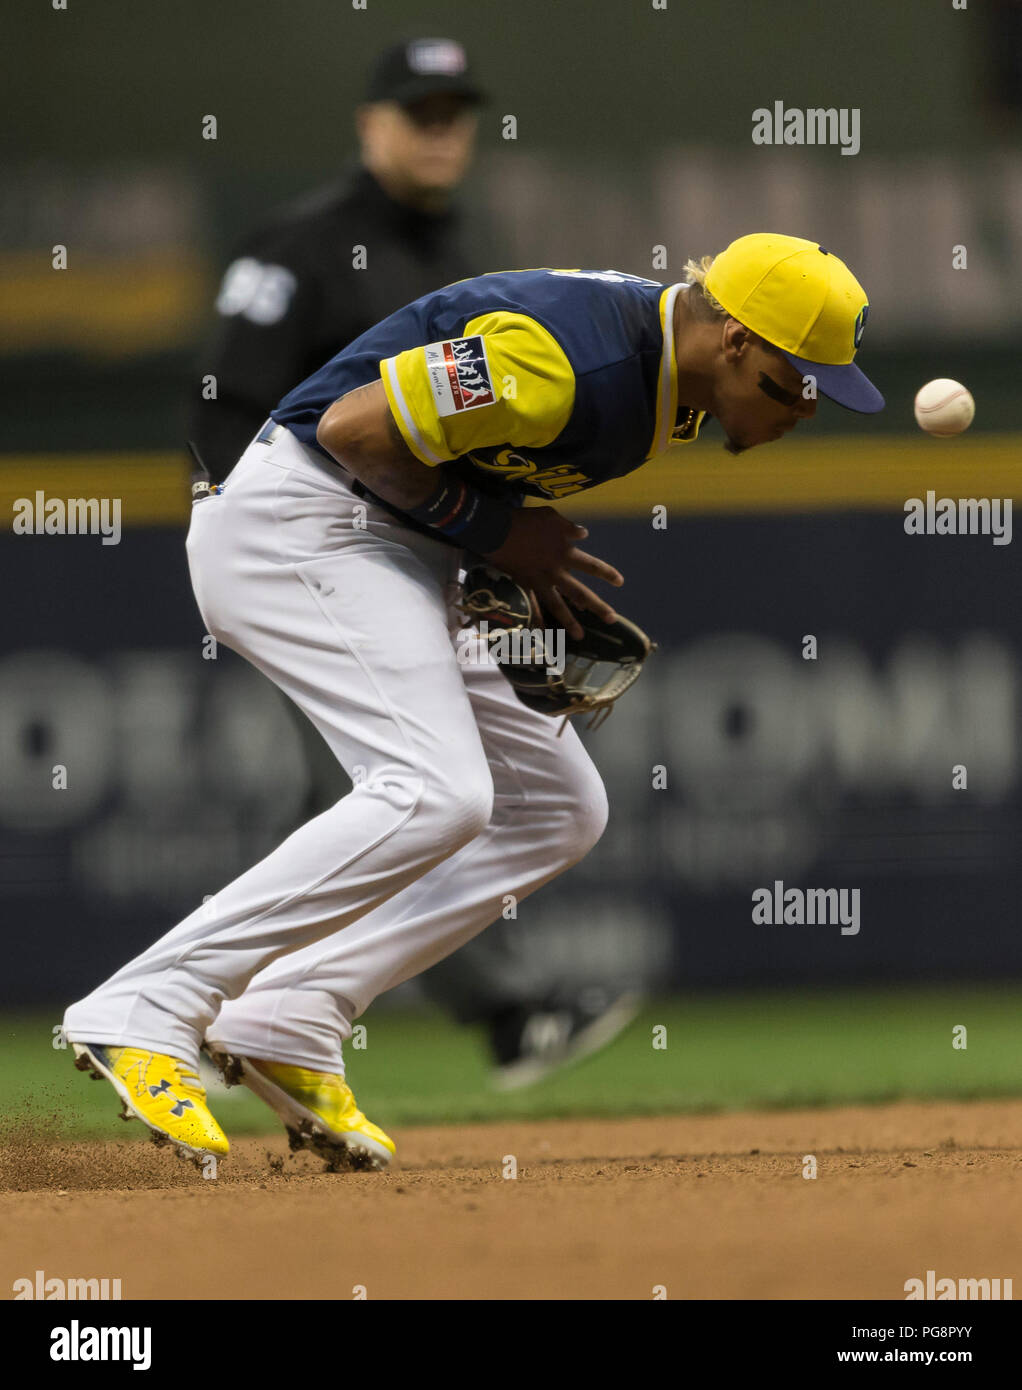 Milwaukee, USA. August 24, 2018: Milwaukee Brewers shortstop Orlando Arcia  #3 in action during the Major League Baseball game between the Milwaukee  Brewers and the Pittsburgh Pirates at Miller Park in Milwaukee